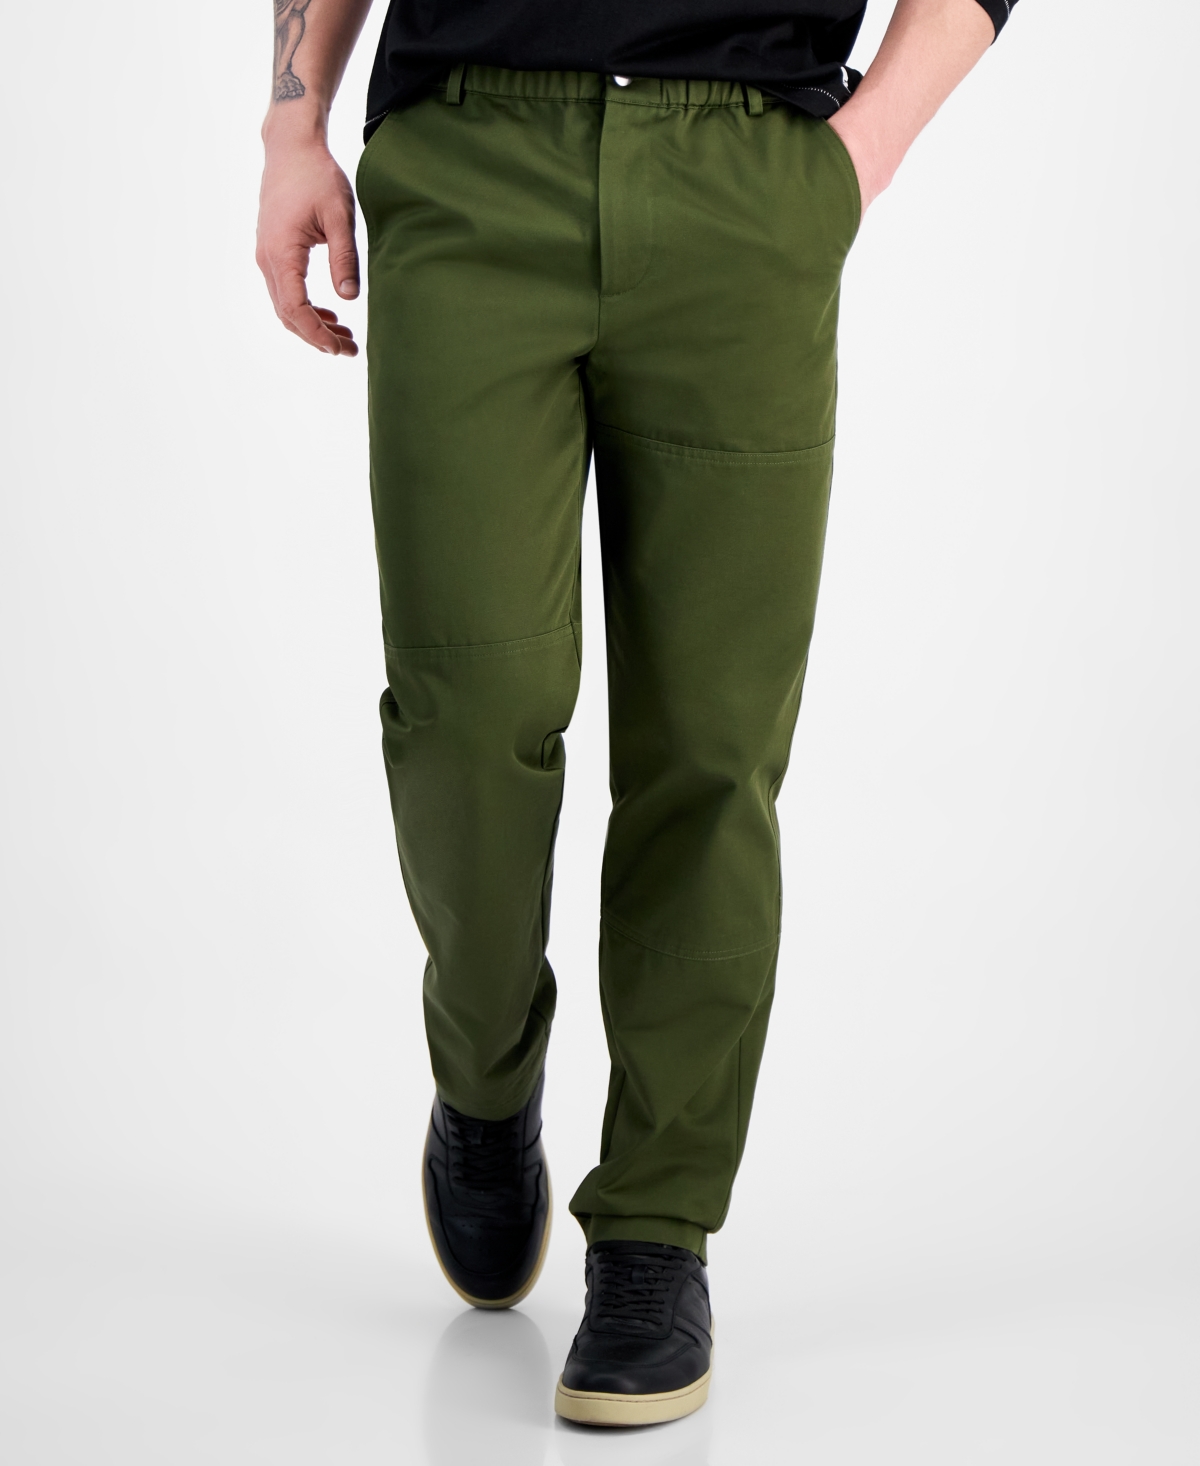 Men's Regular-Fit Asymmetrical Pieced Chino Pants - Olive